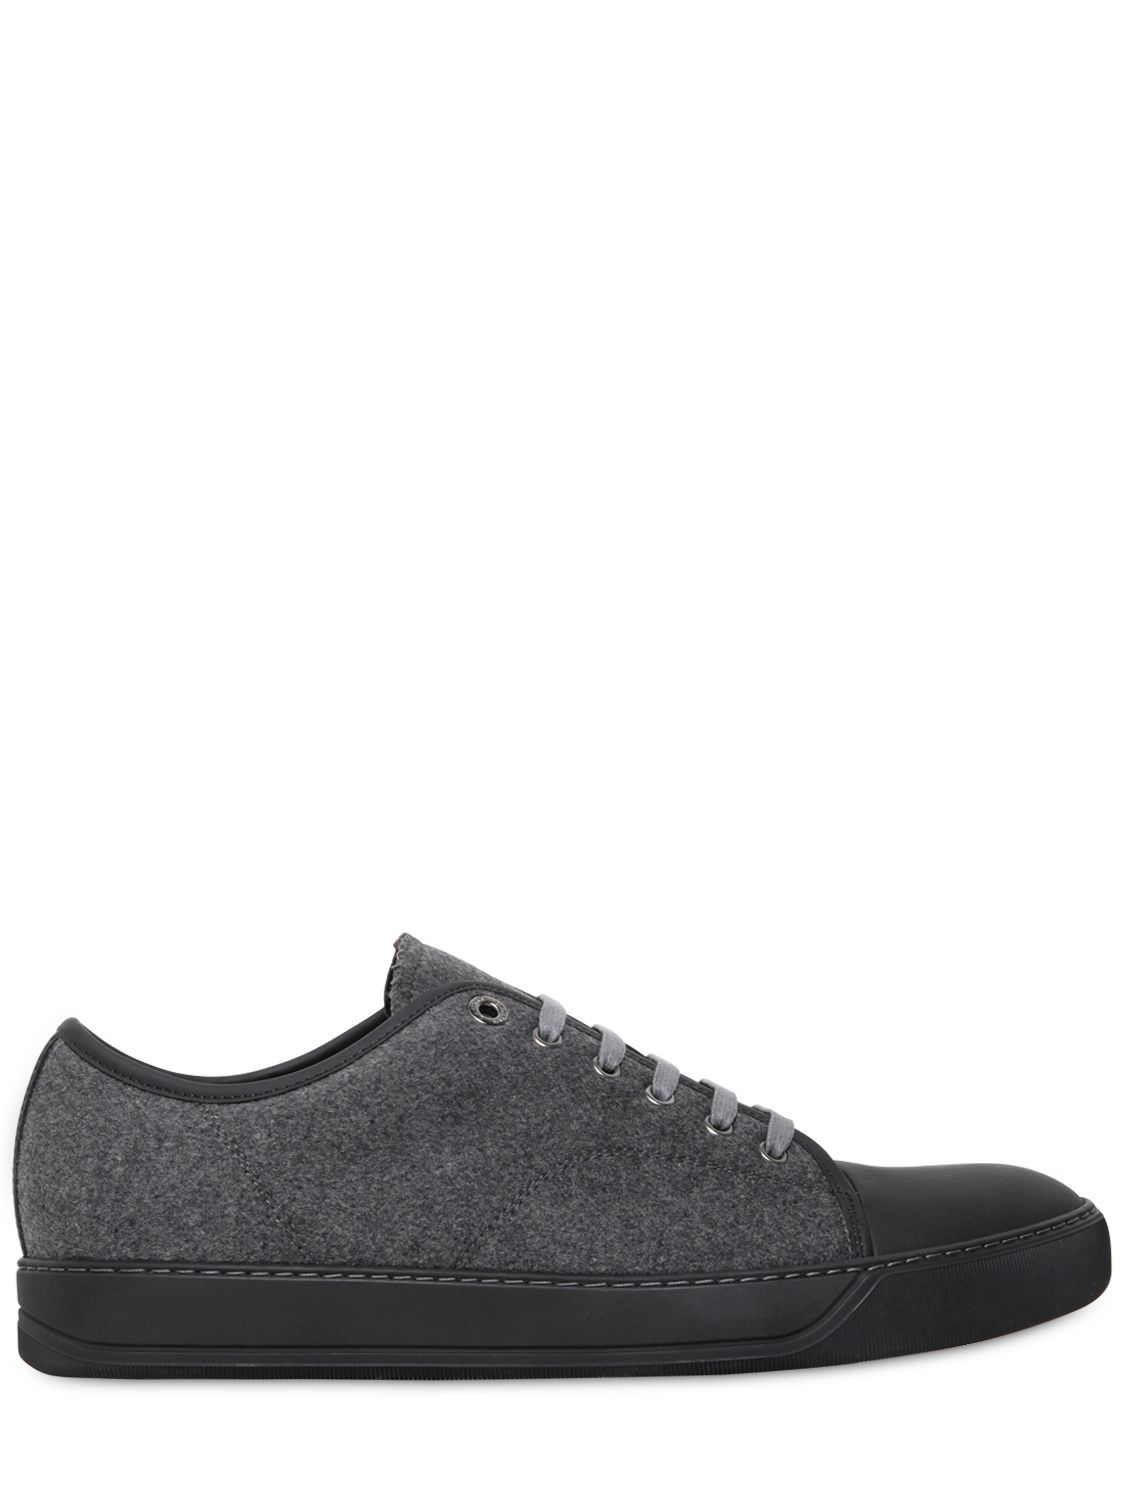 Lanvin Wool Felt and Leather Sneakers in Grey (Gray) for Men - Lyst